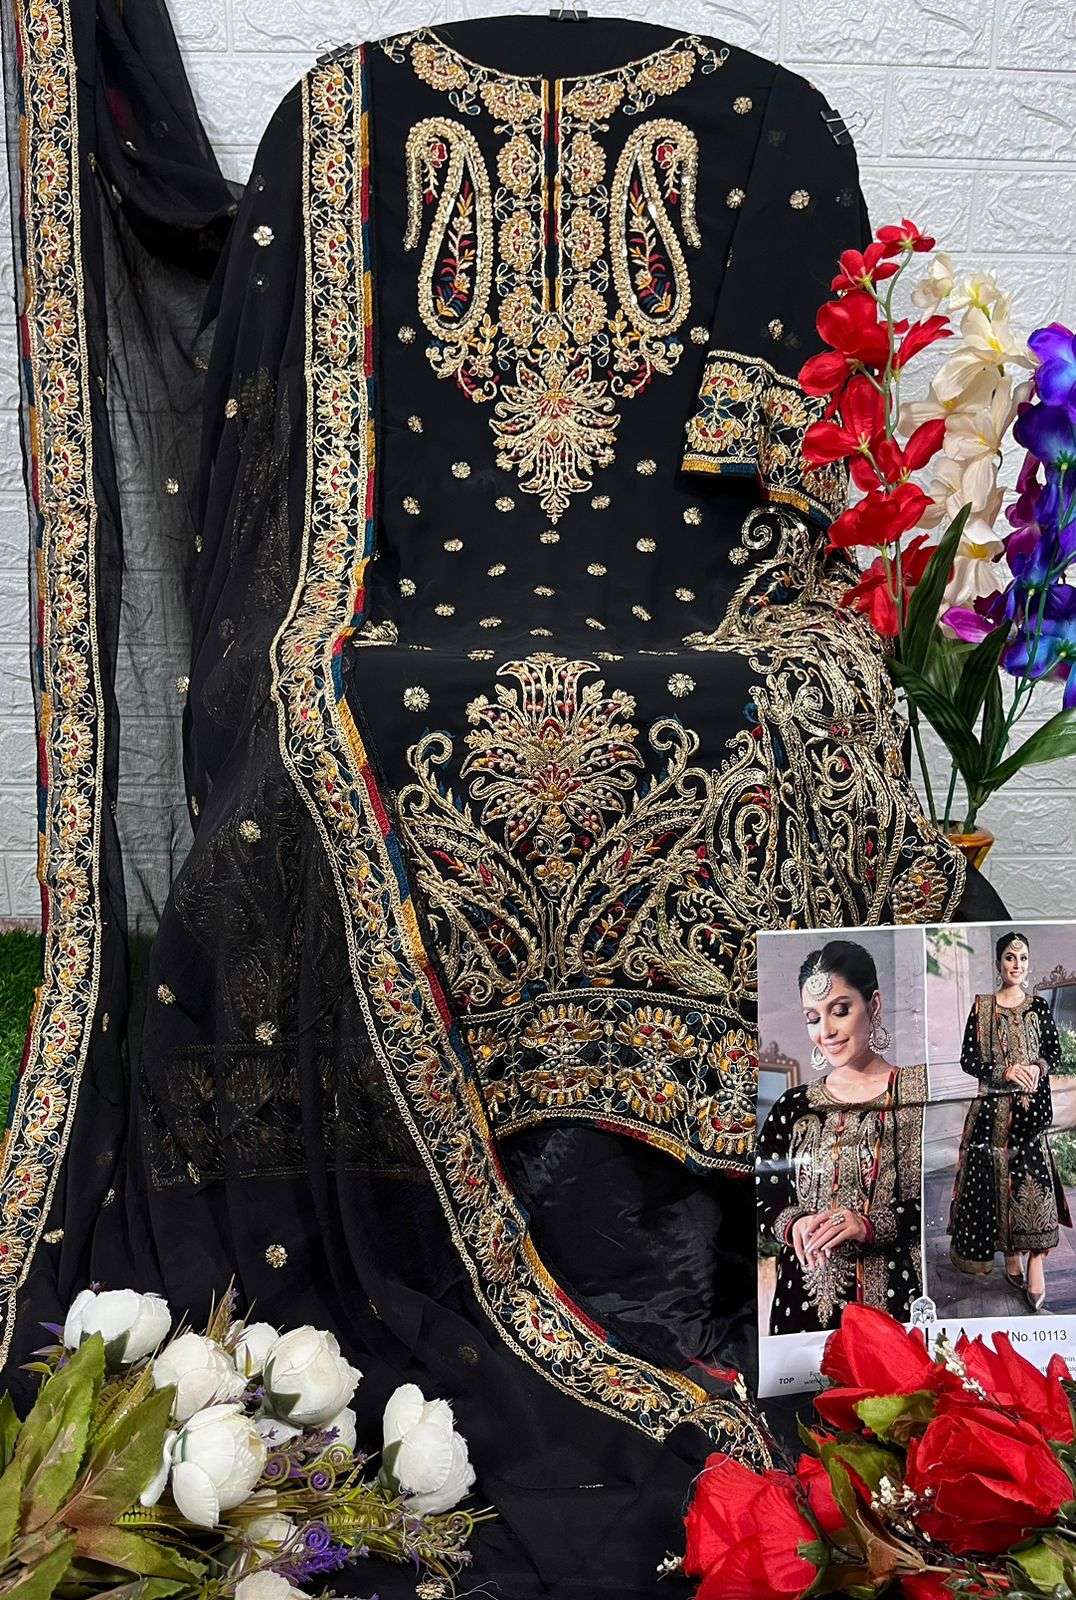 Zaha-10113 By Zaha Designer Pakistani Suits Beautiful Stylish Fancy Colorful Party Wear & Occasional Wear Faux Georgette Embroidered Dresses At Wholesale Price